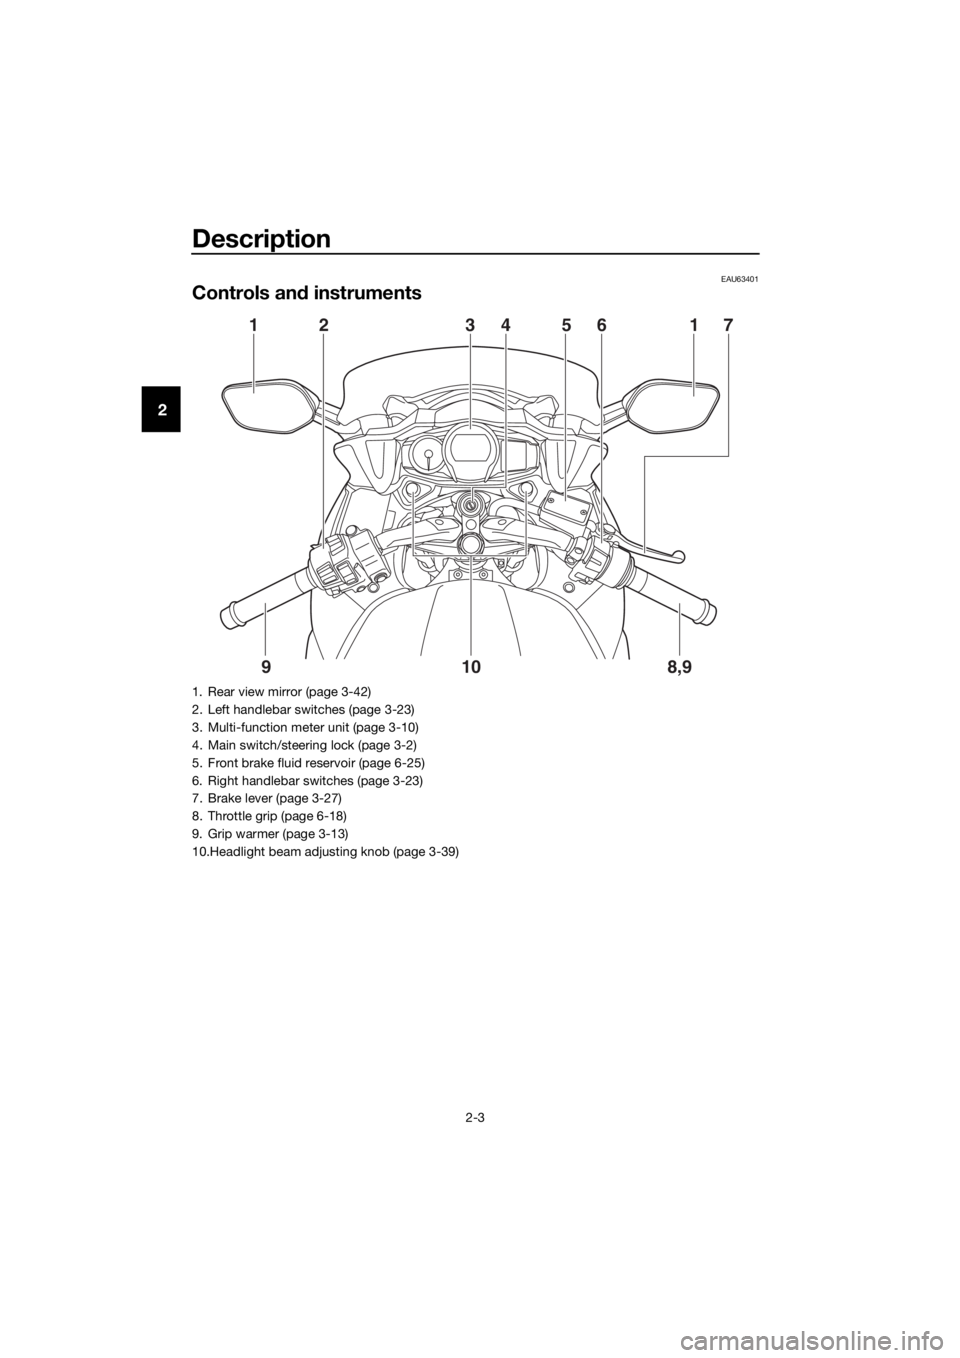 YAMAHA FJR1300AS 2018  Owners Manual Description
2-3
2
EAU63401
Controls and instruments
12 3456 17
8,9
10
9
1. Rear view mirror (page 3-42)
2. Left handlebar switches (page 3-23)
3. Multi-function meter unit (page 3-10)
4. Main switch/s